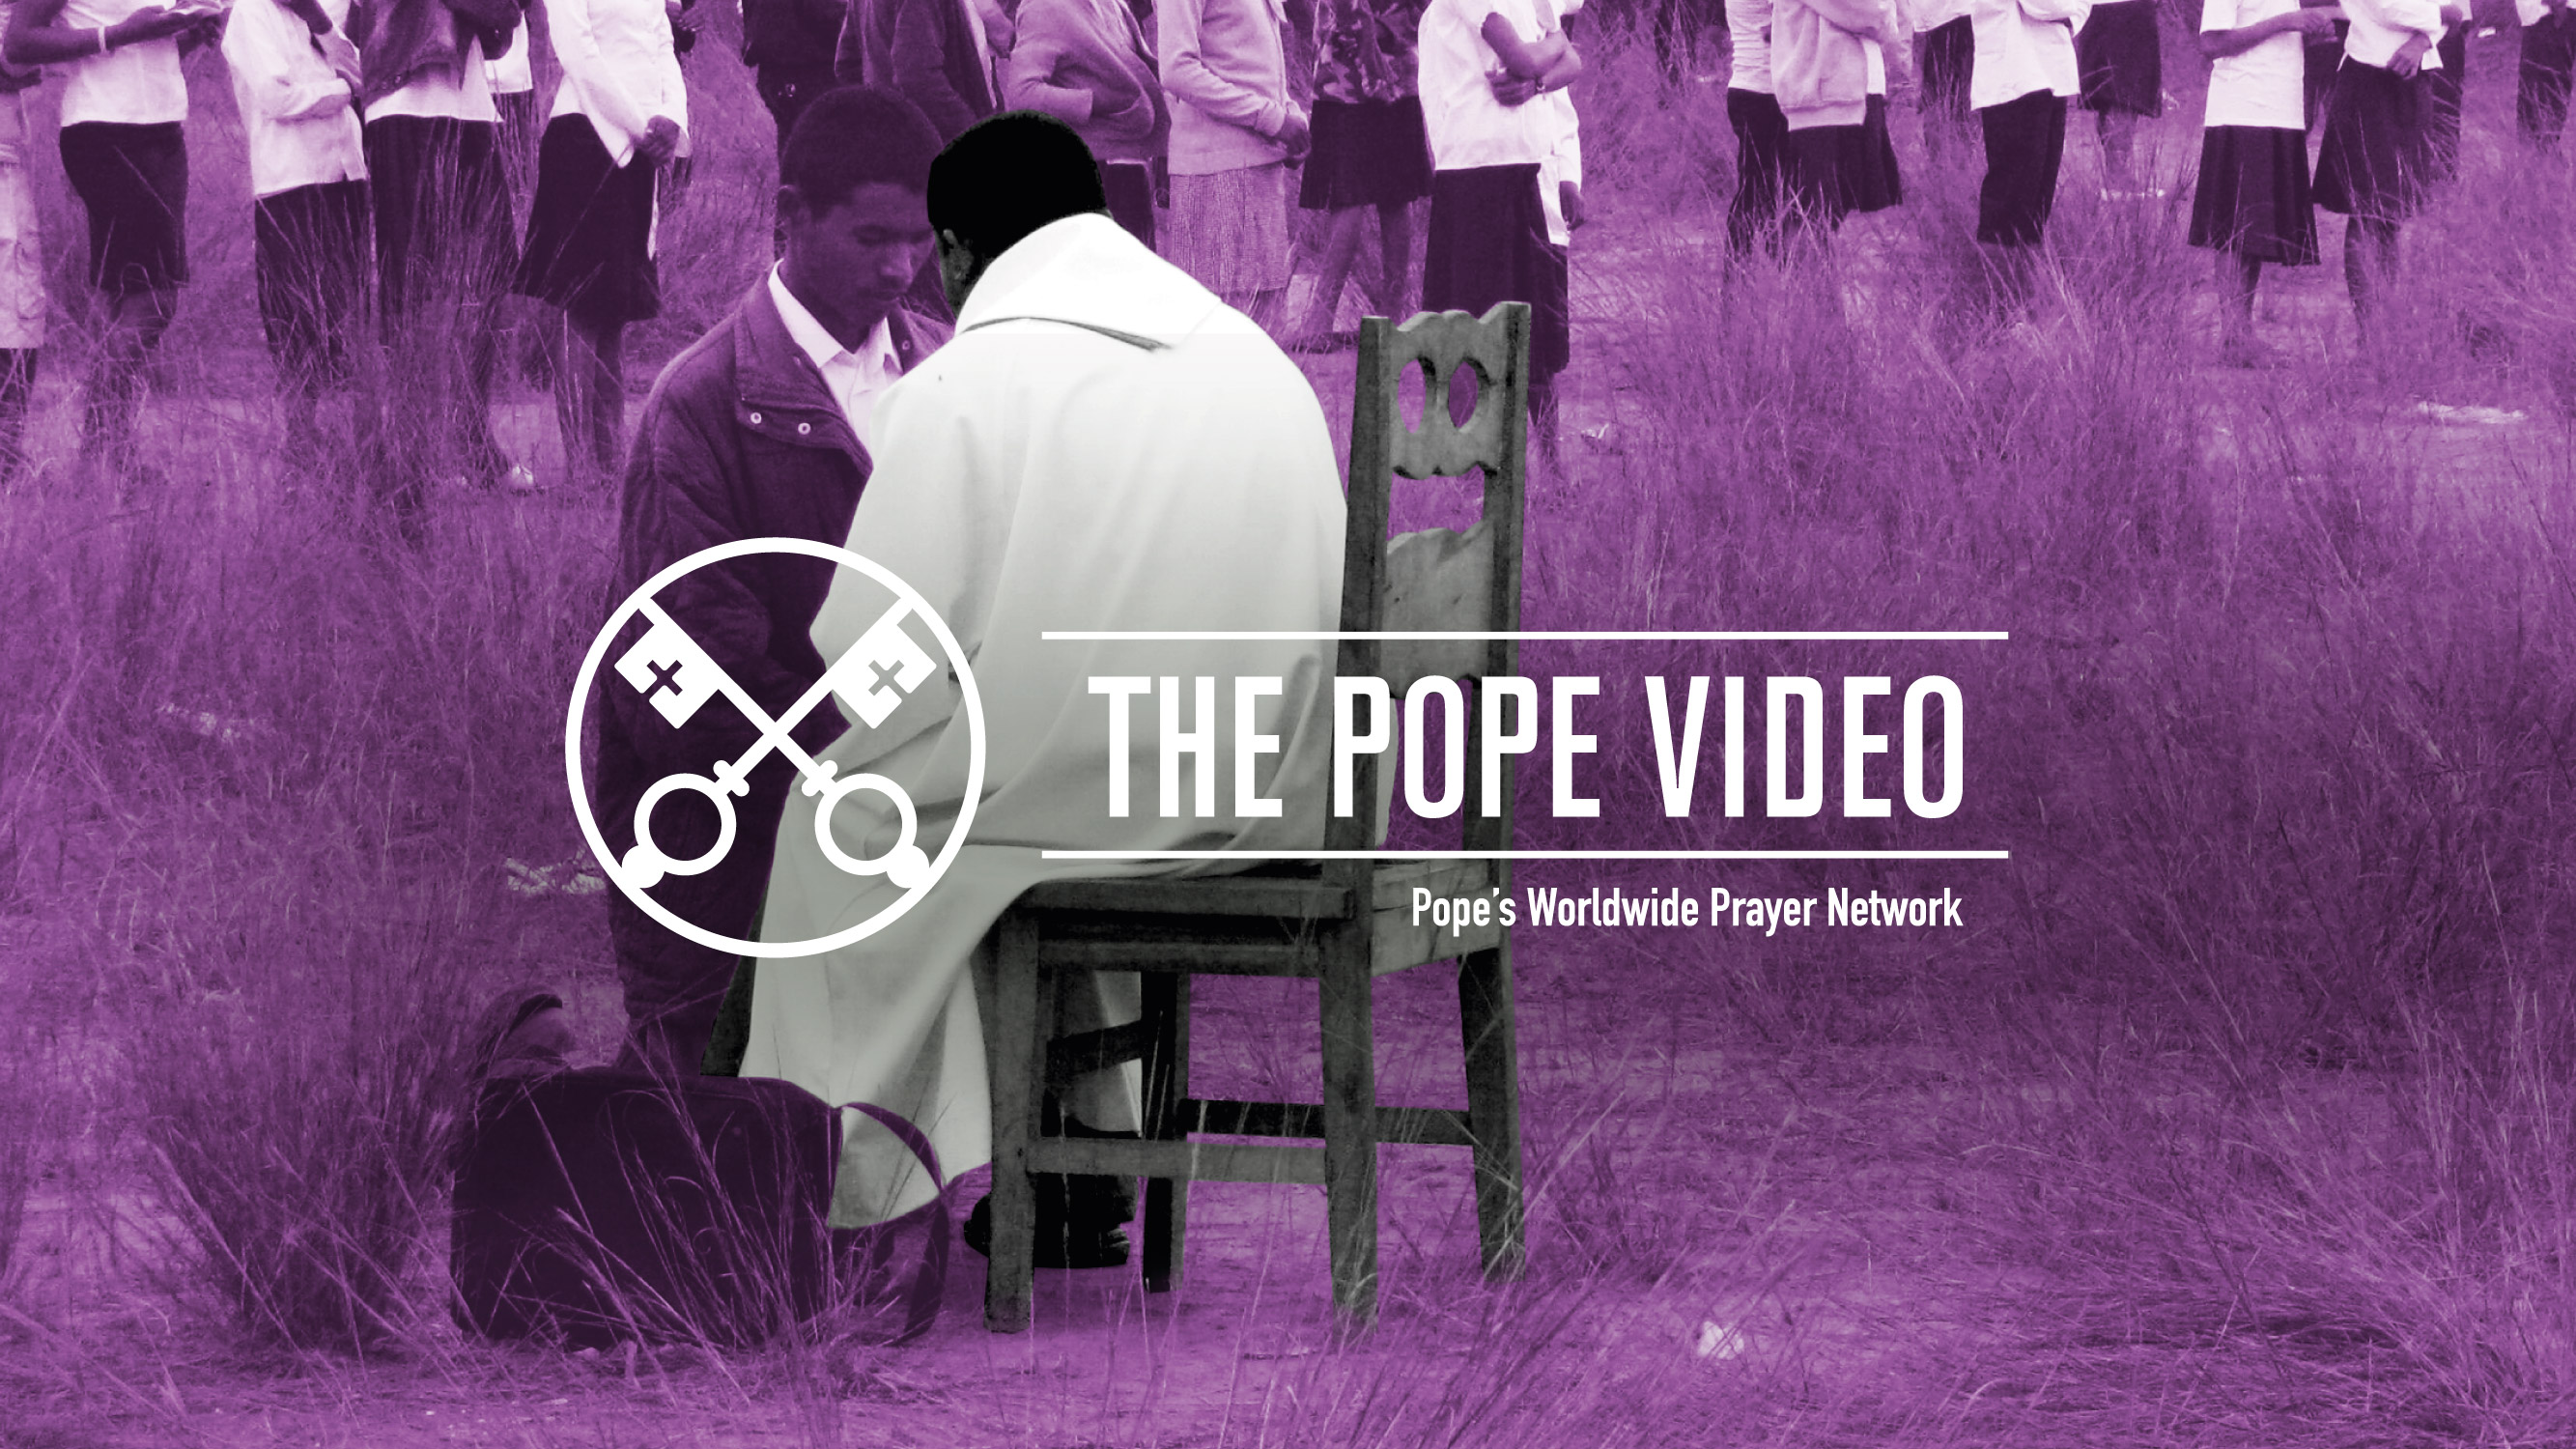 The Pope Video June 2019 (Official Image)